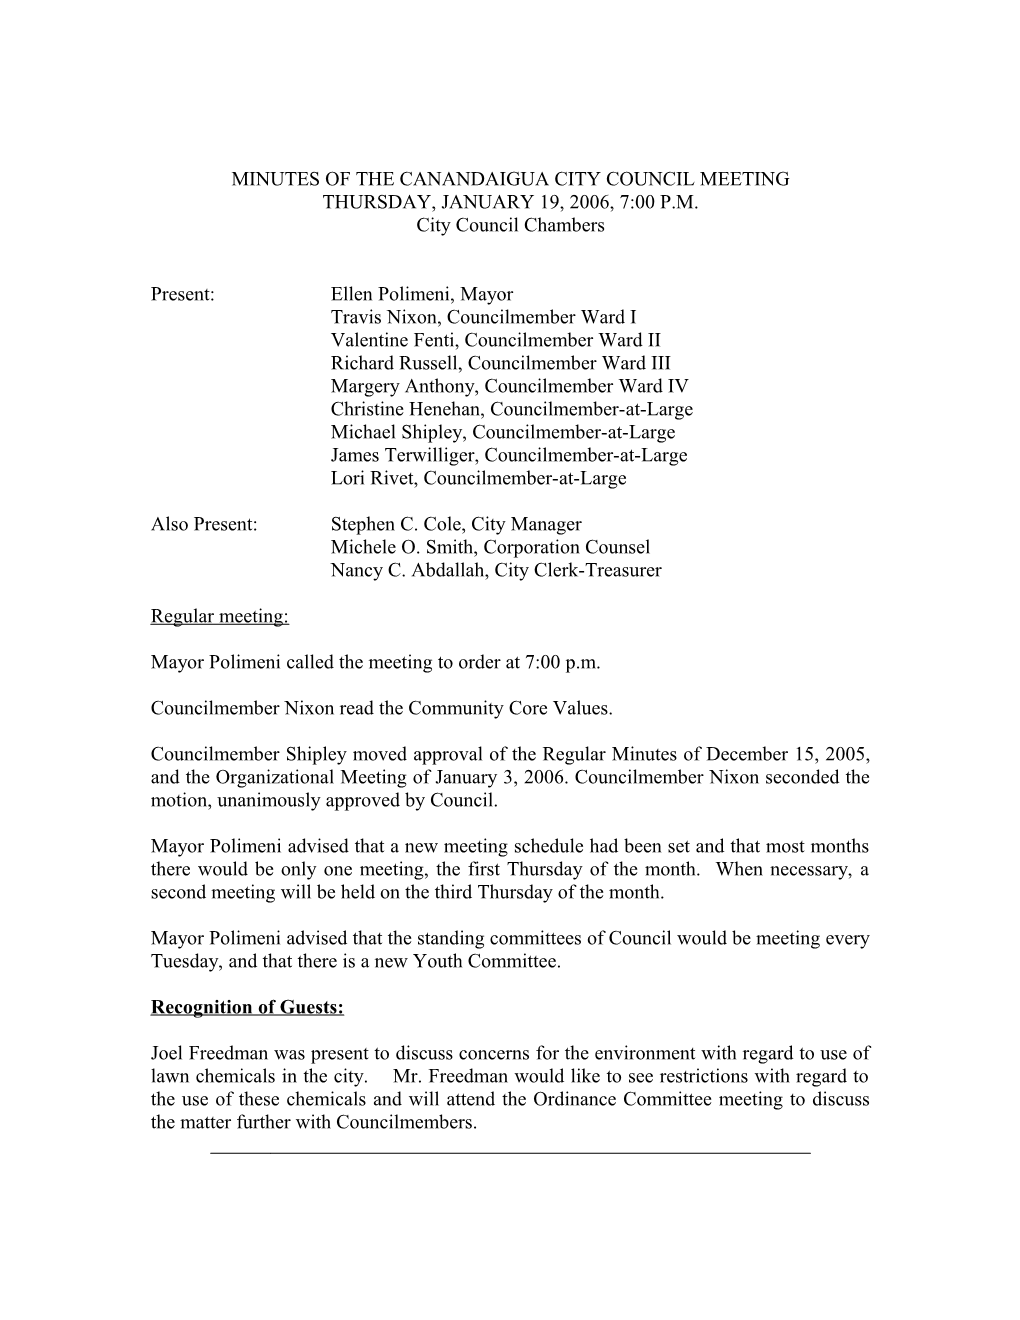 Minutes of the Regular Meeting of the City Council, Held s1